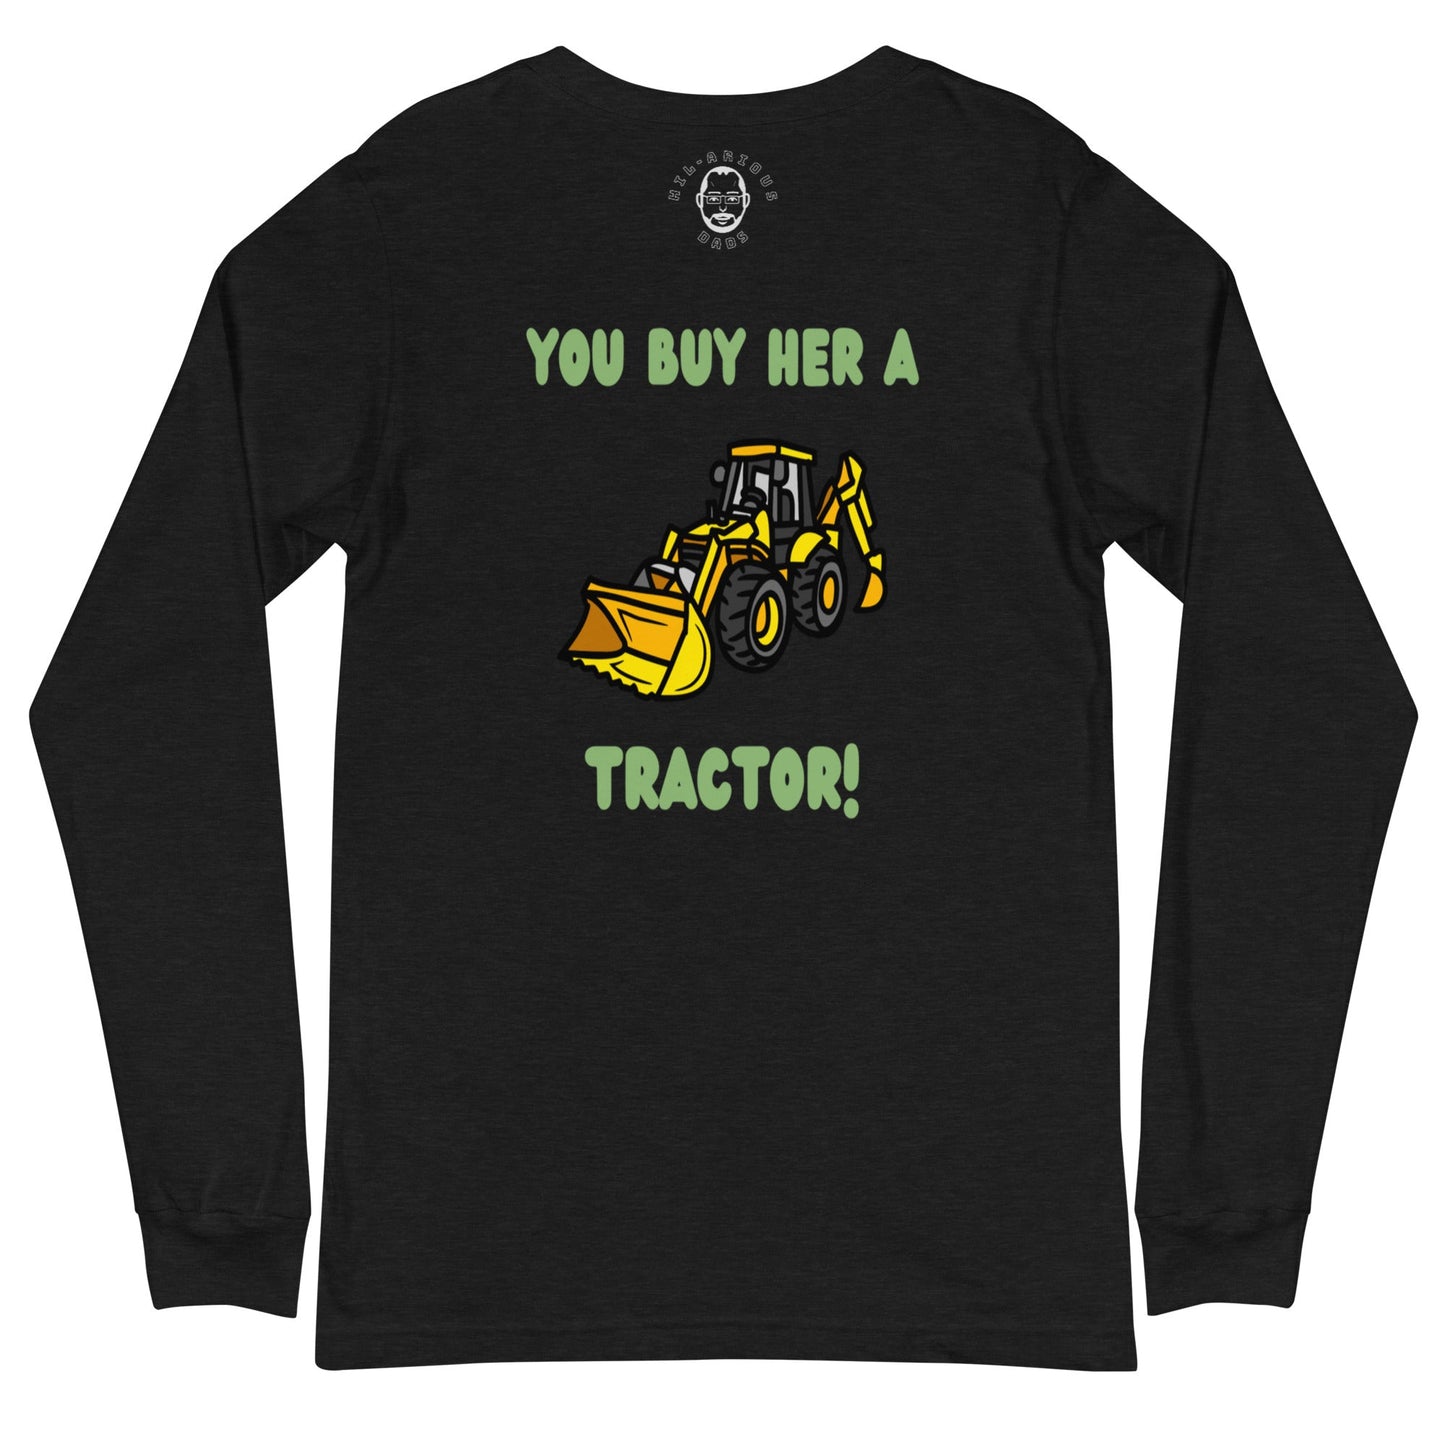 How do you get a country girl's attention?-Long Sleeve Tee - Hil-arious Dads